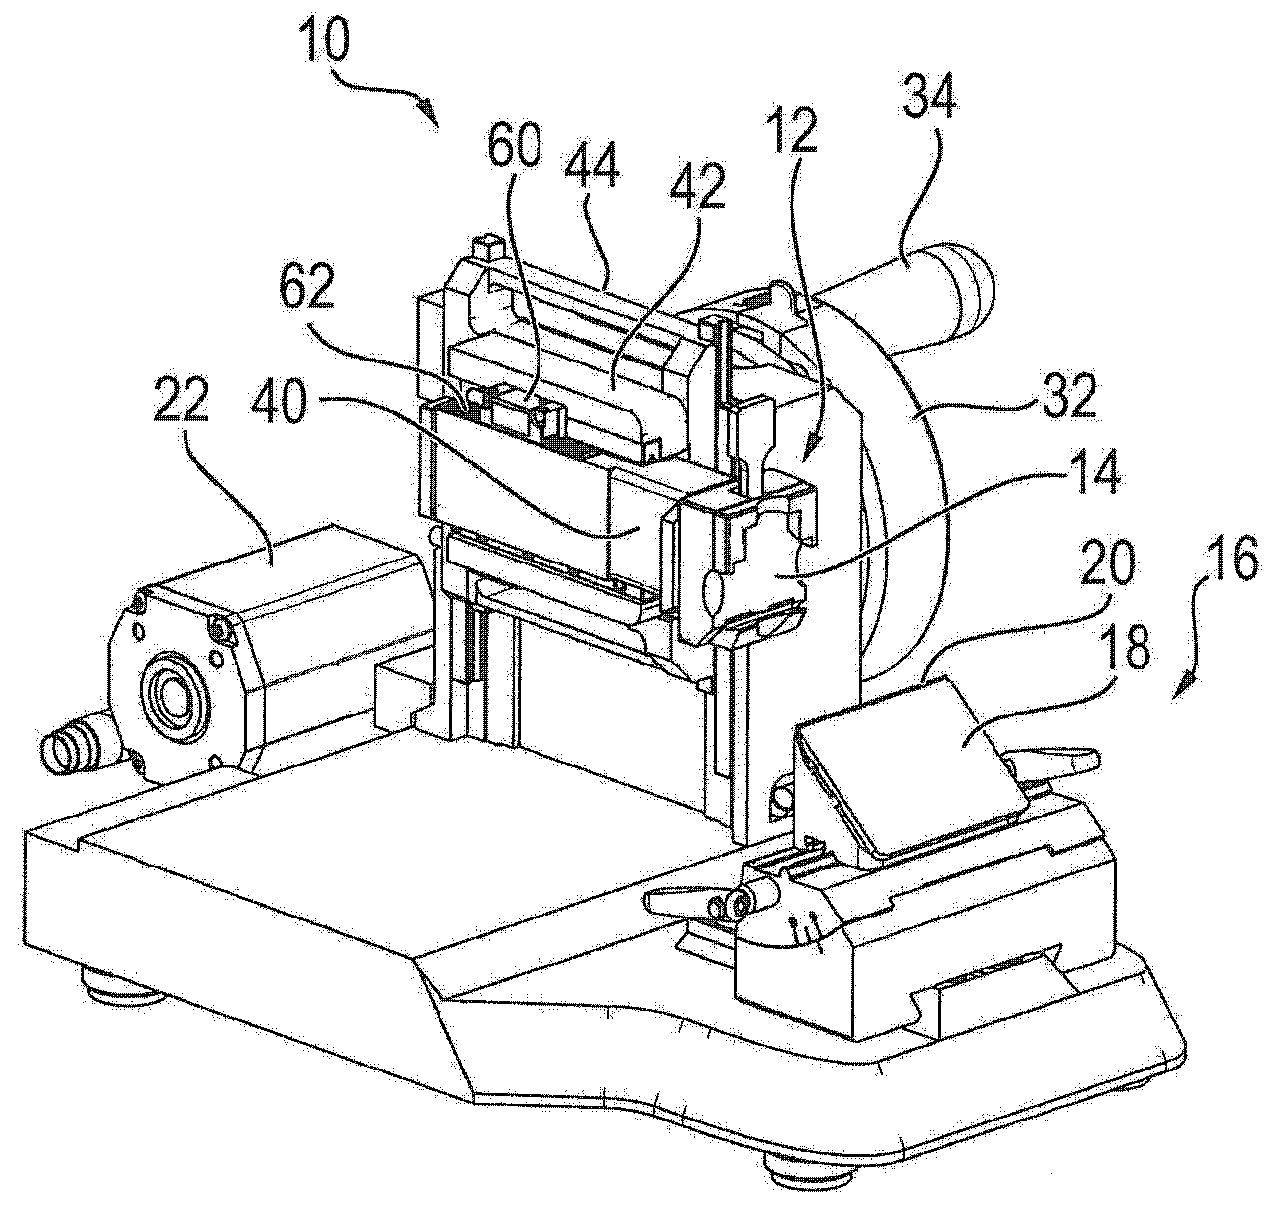 Microtome having a piezoelectric linear actuator